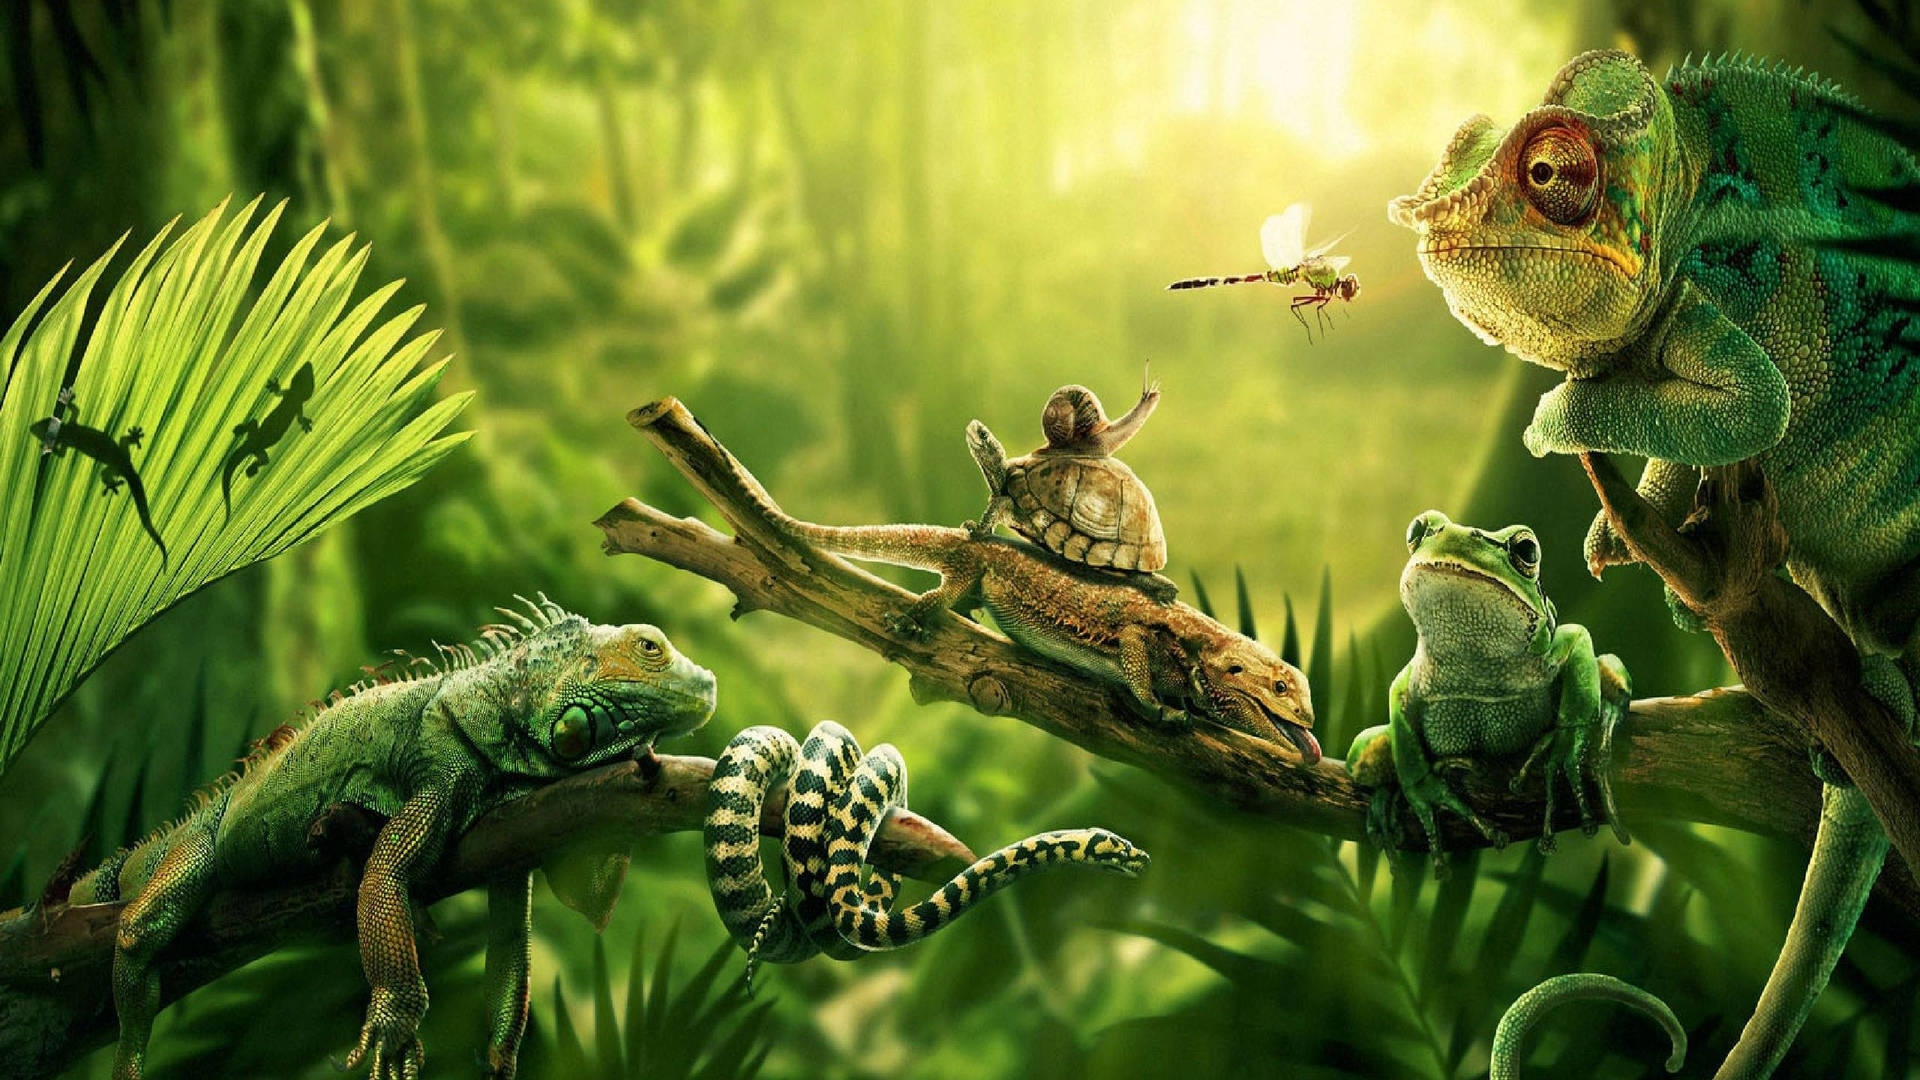 Reptileri Djungeln. (this Would Be A Suitable Title For A Wallpaper Featuring Reptiles In A Jungle Setting On A Computer Or Mobile Device.) Wallpaper